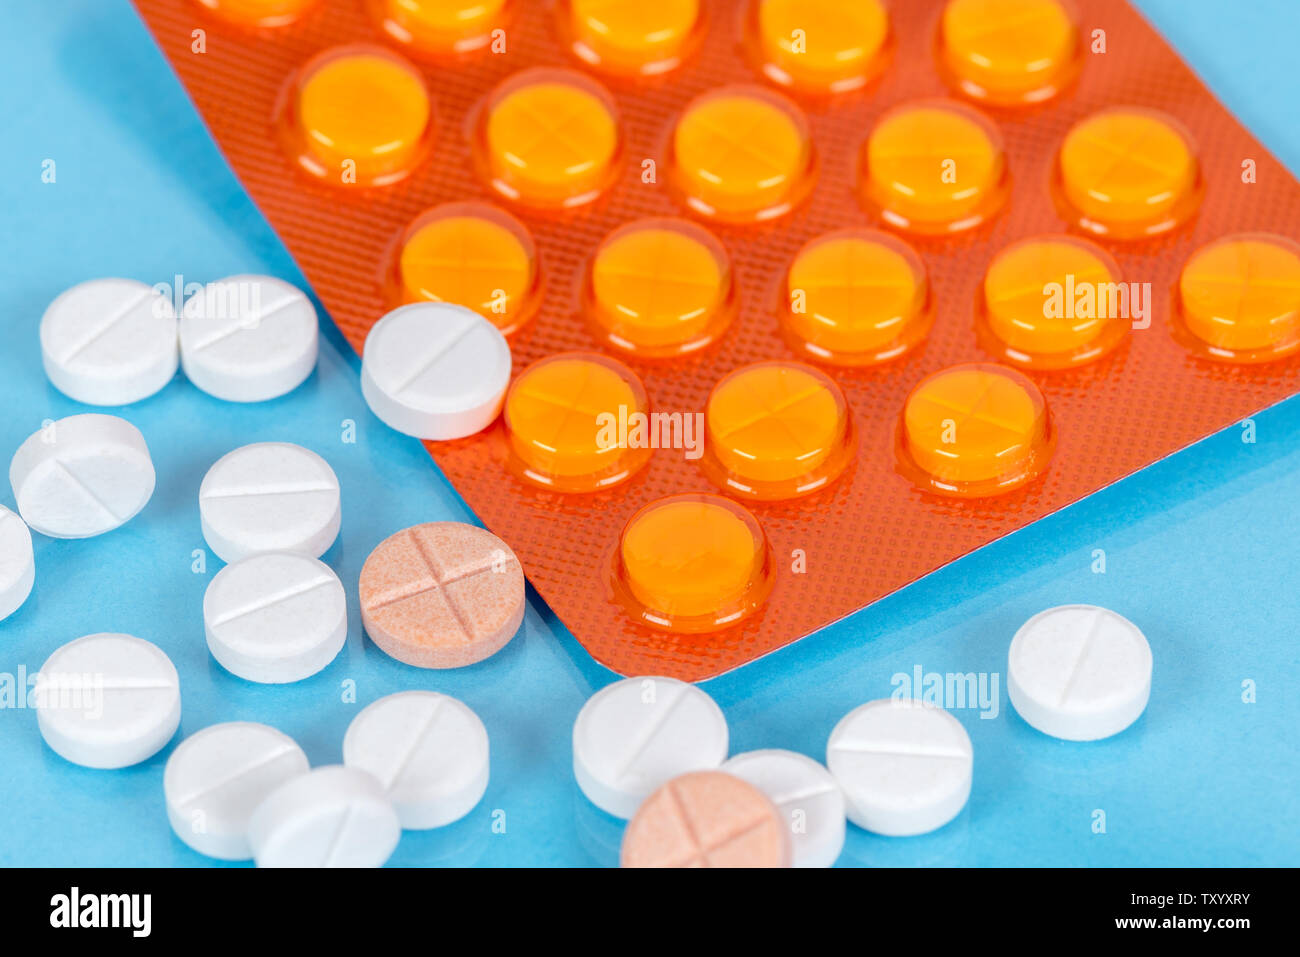 Pills and a blister pack on a blue background Stock Photo